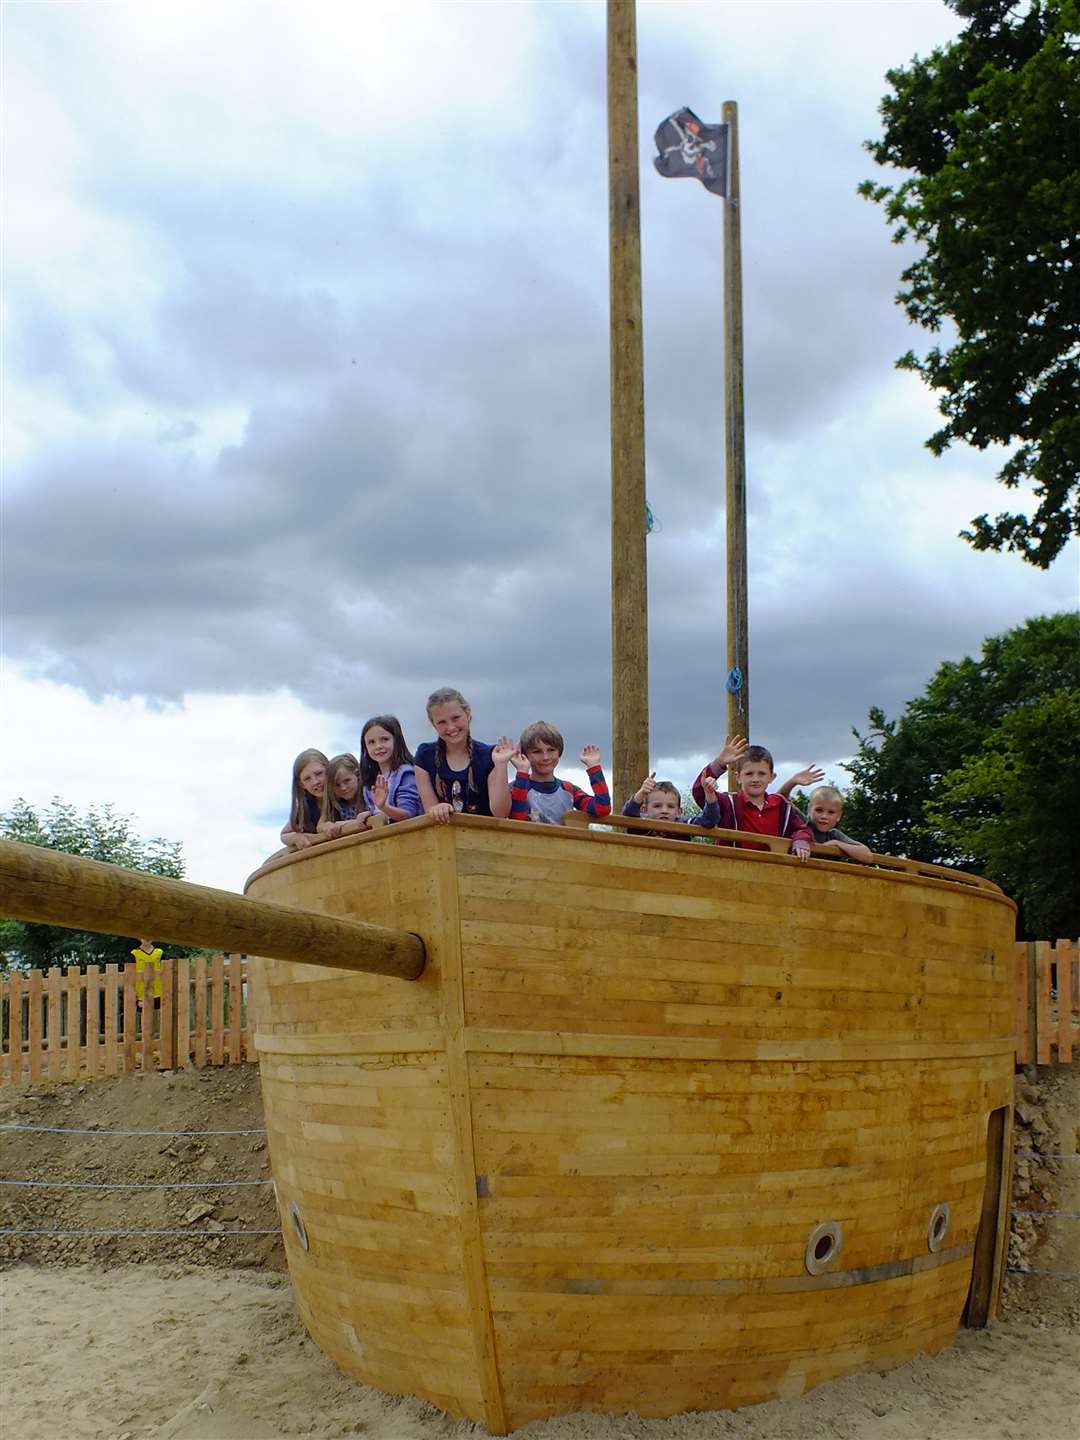 All aboard the pirate ship at Bewl Water